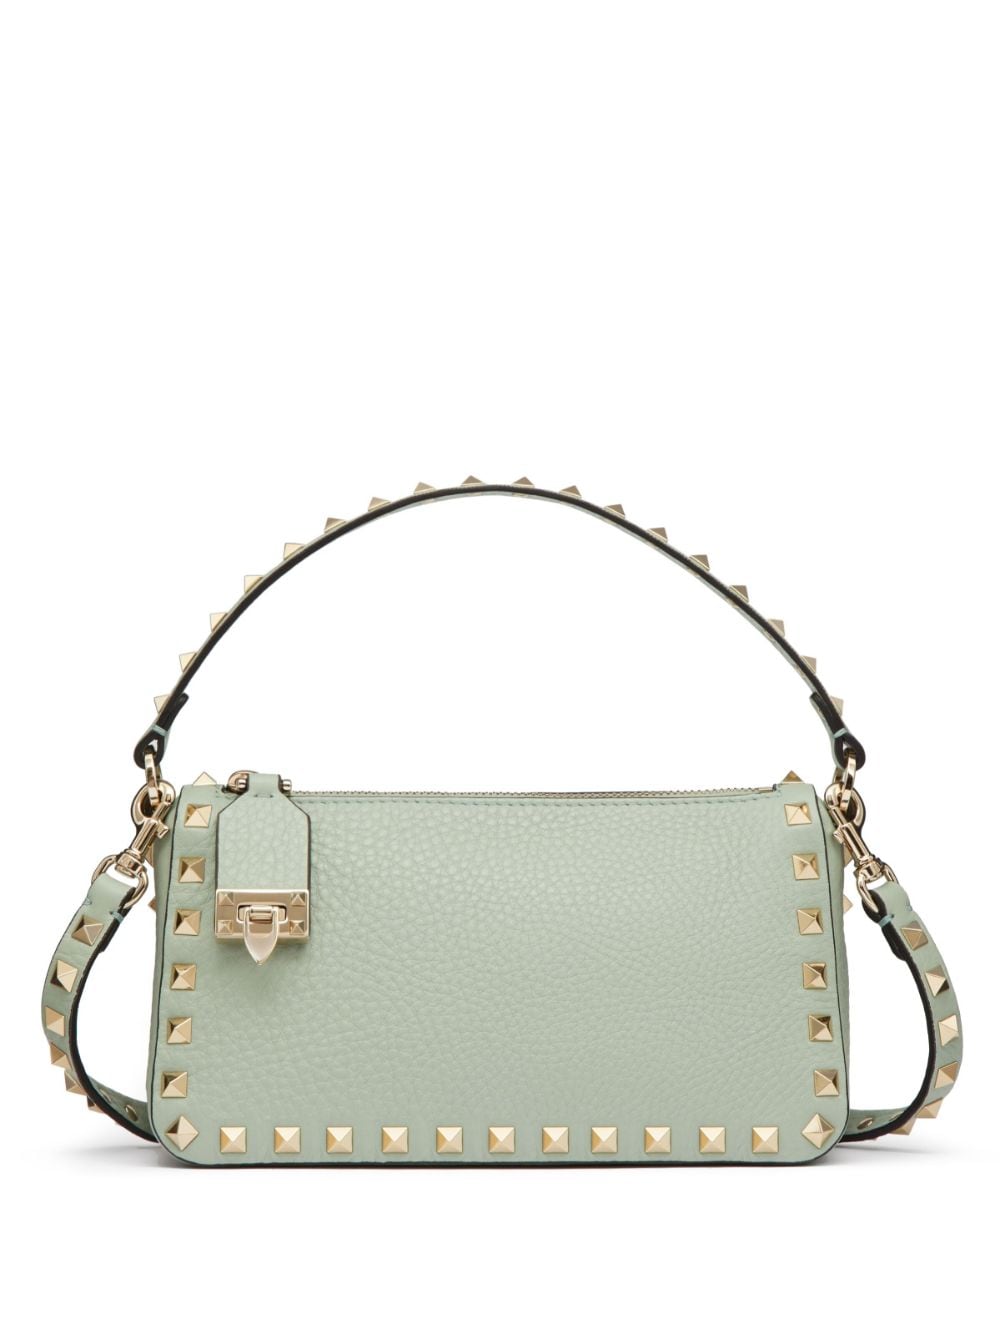 Valentino Green Smooth Leather Rockstud Mini Backpack Bag